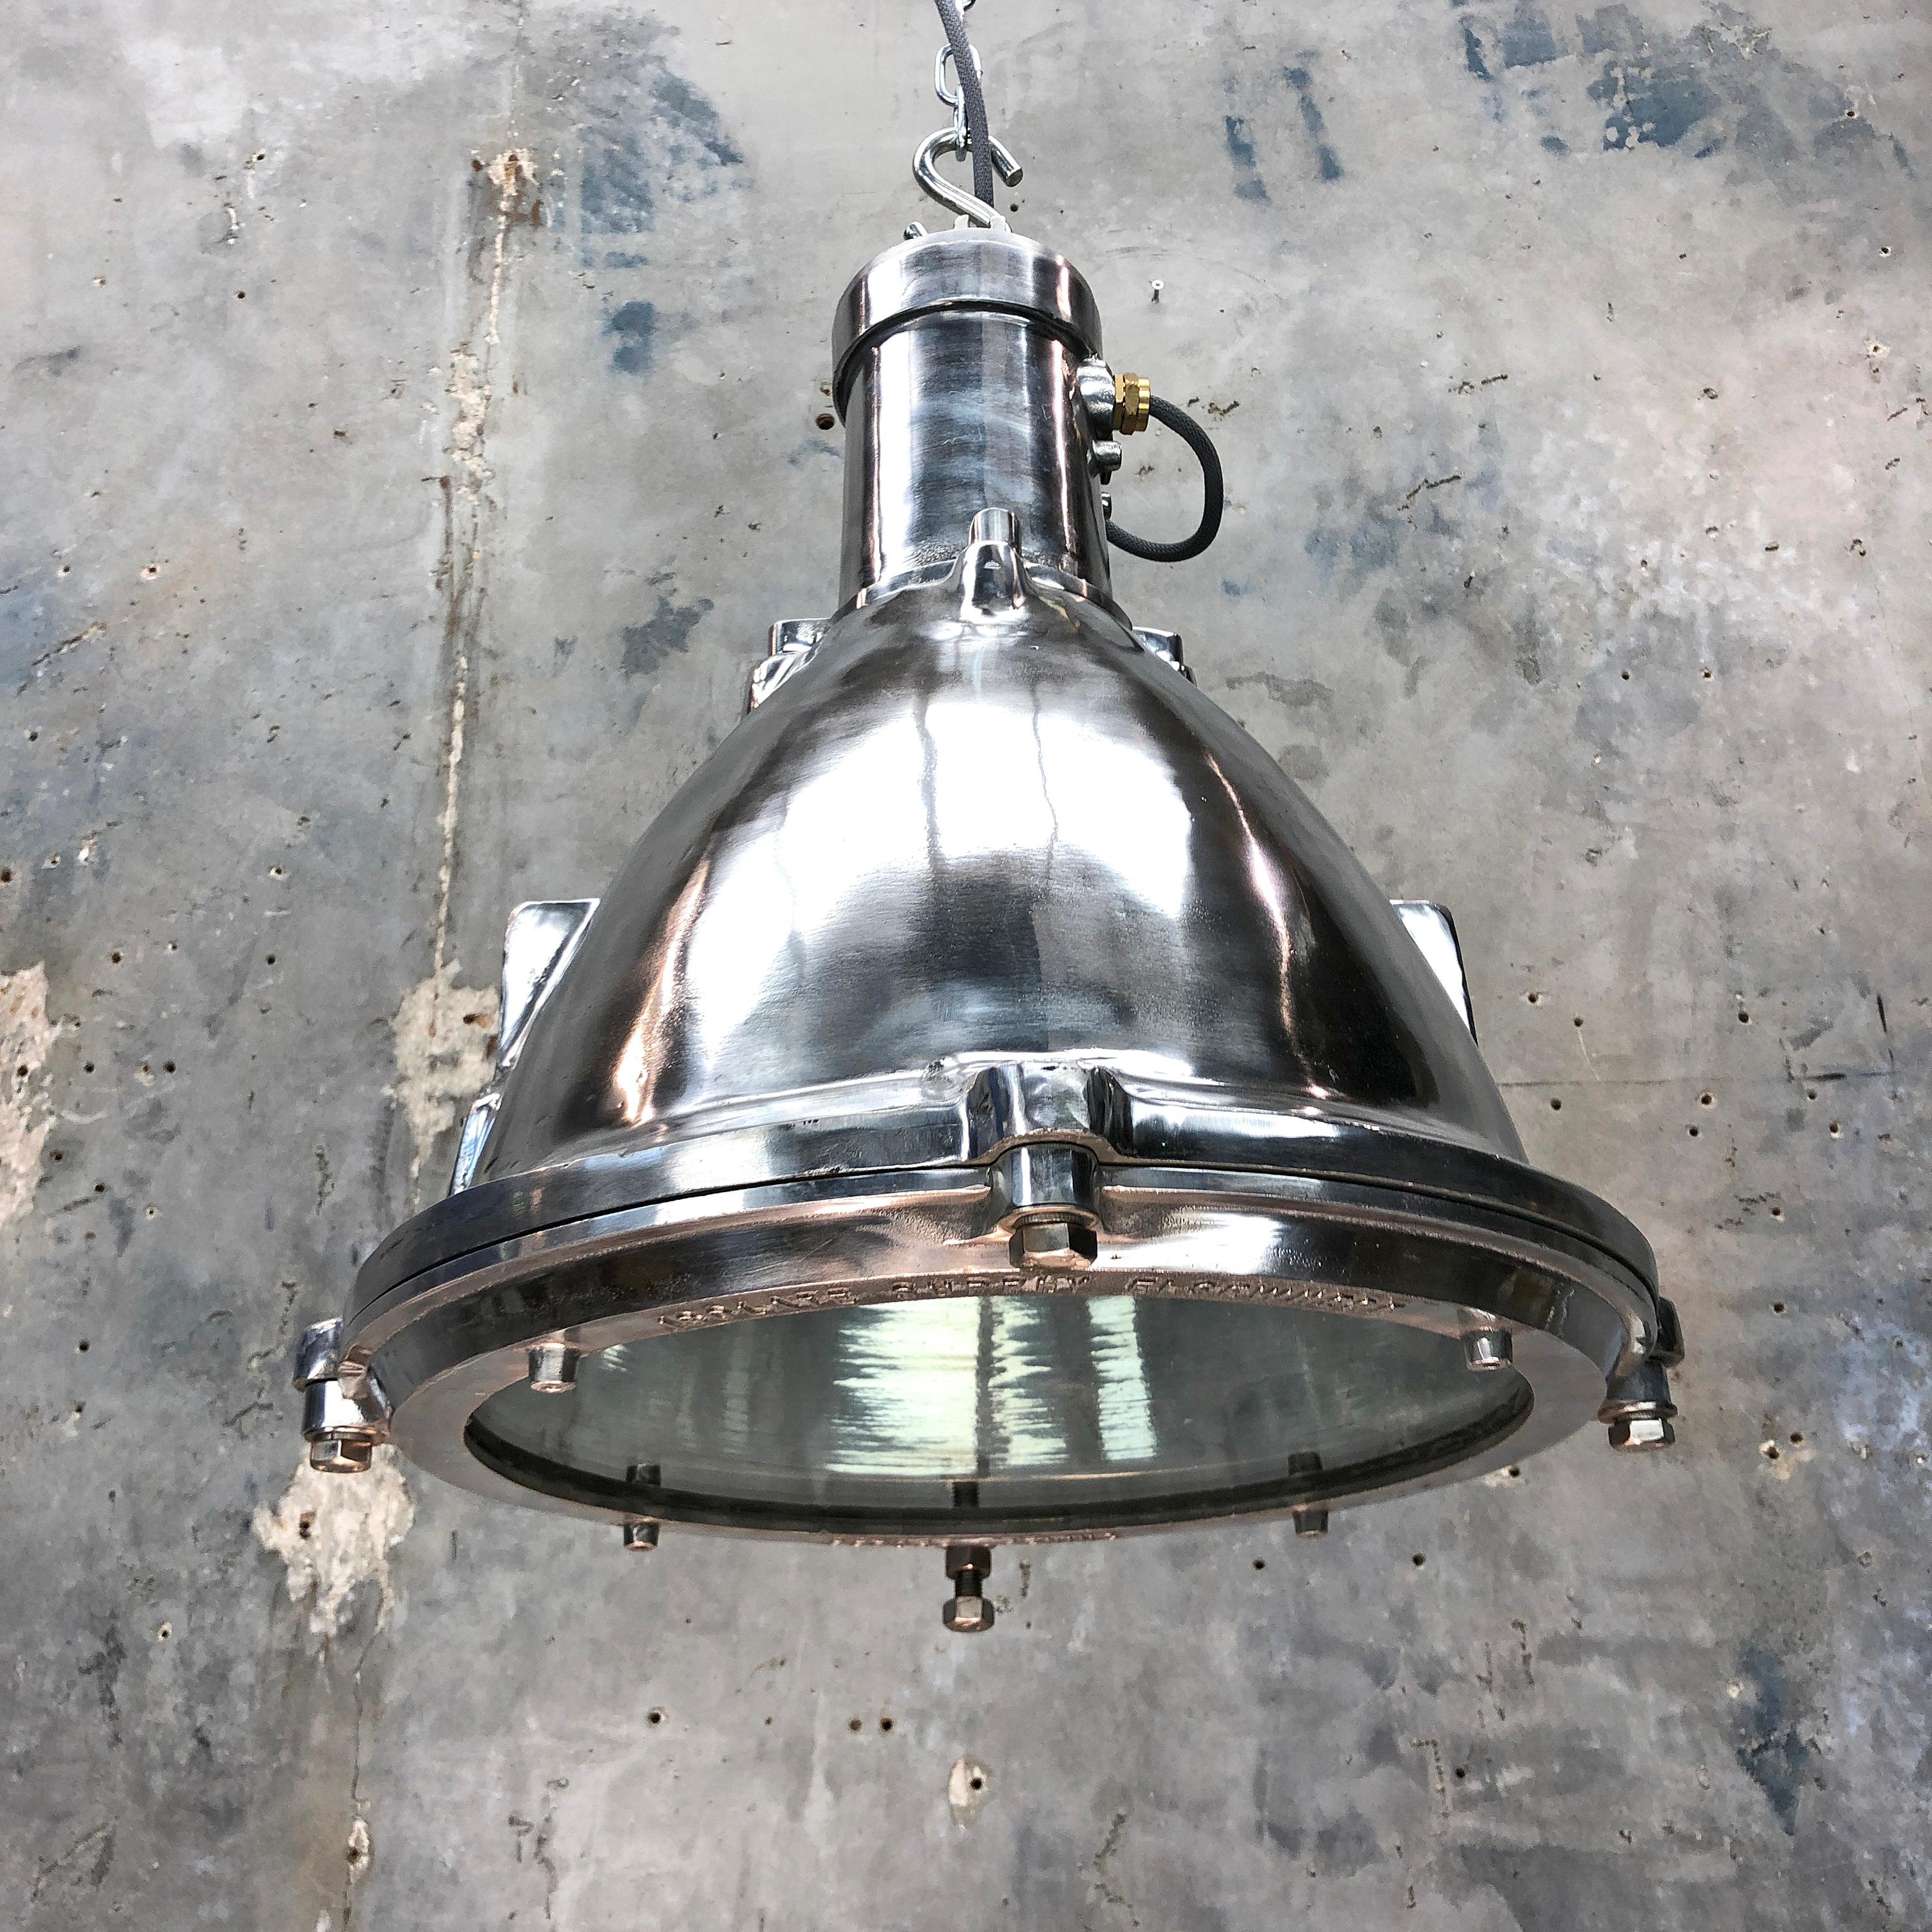 Tempered Late Century Industrial Cast Aluminum and Glass Deck Light by British Baliga